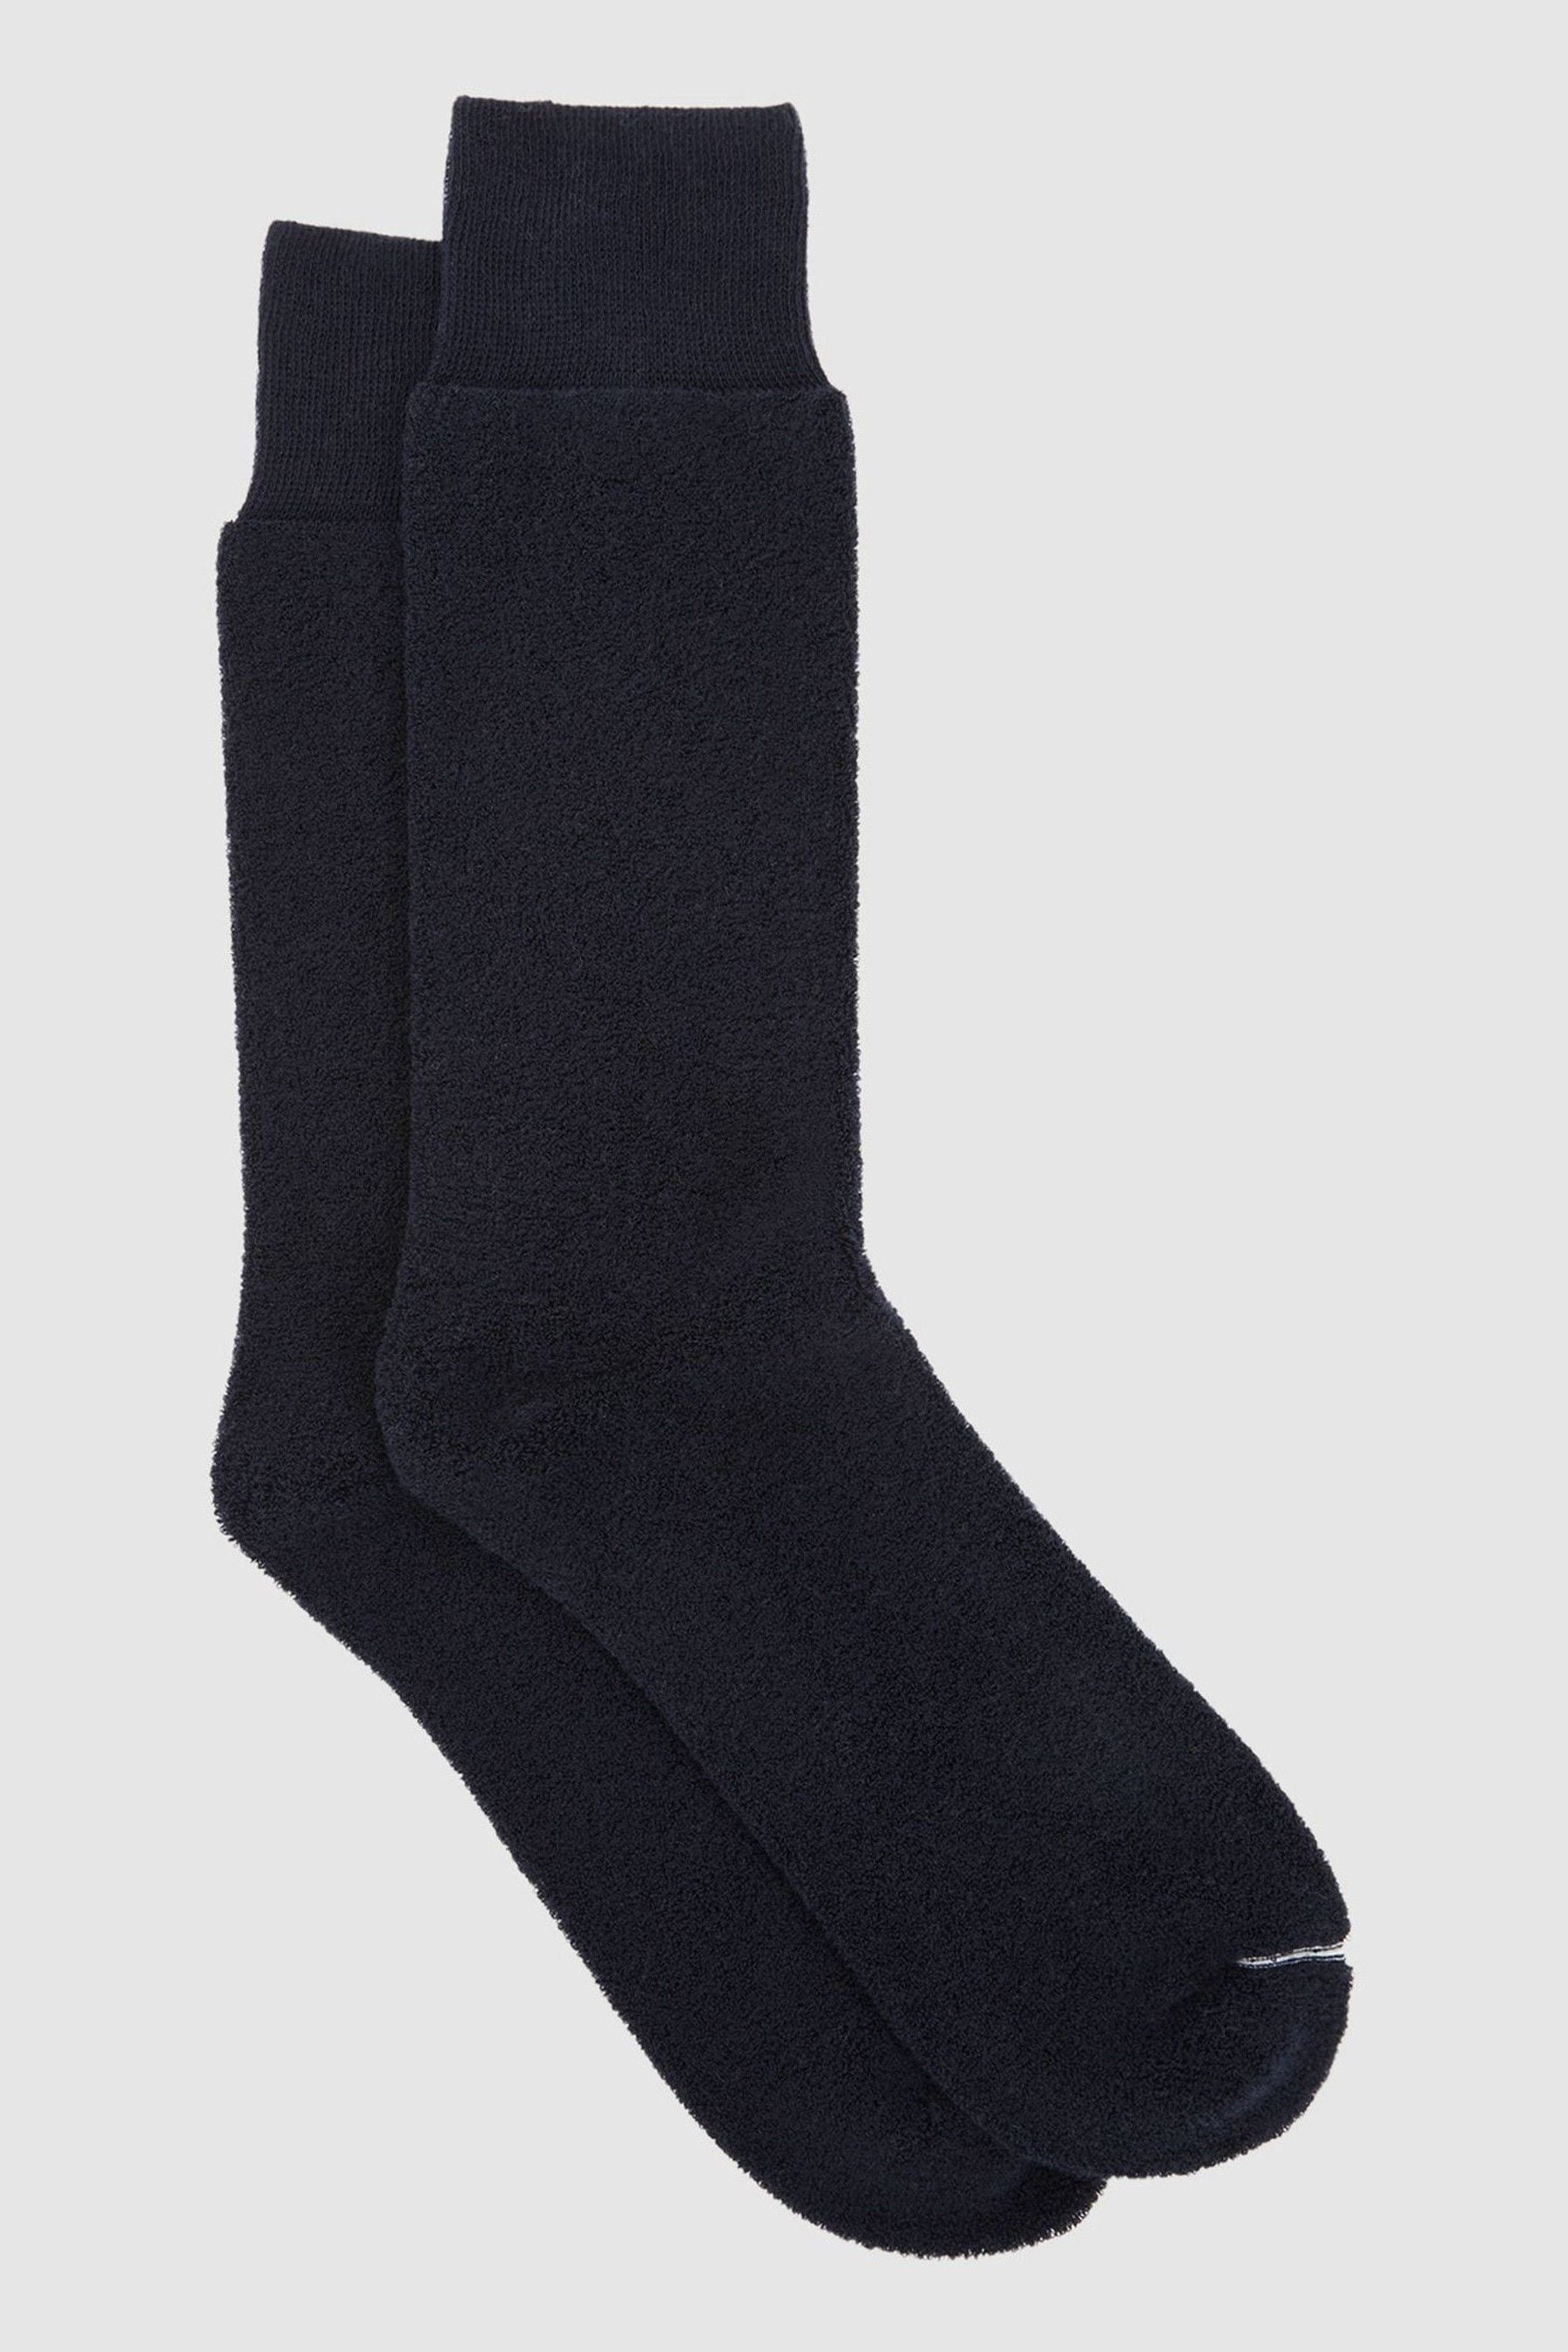 Alers - Navy Cotton Blend Terry Towelling Socks